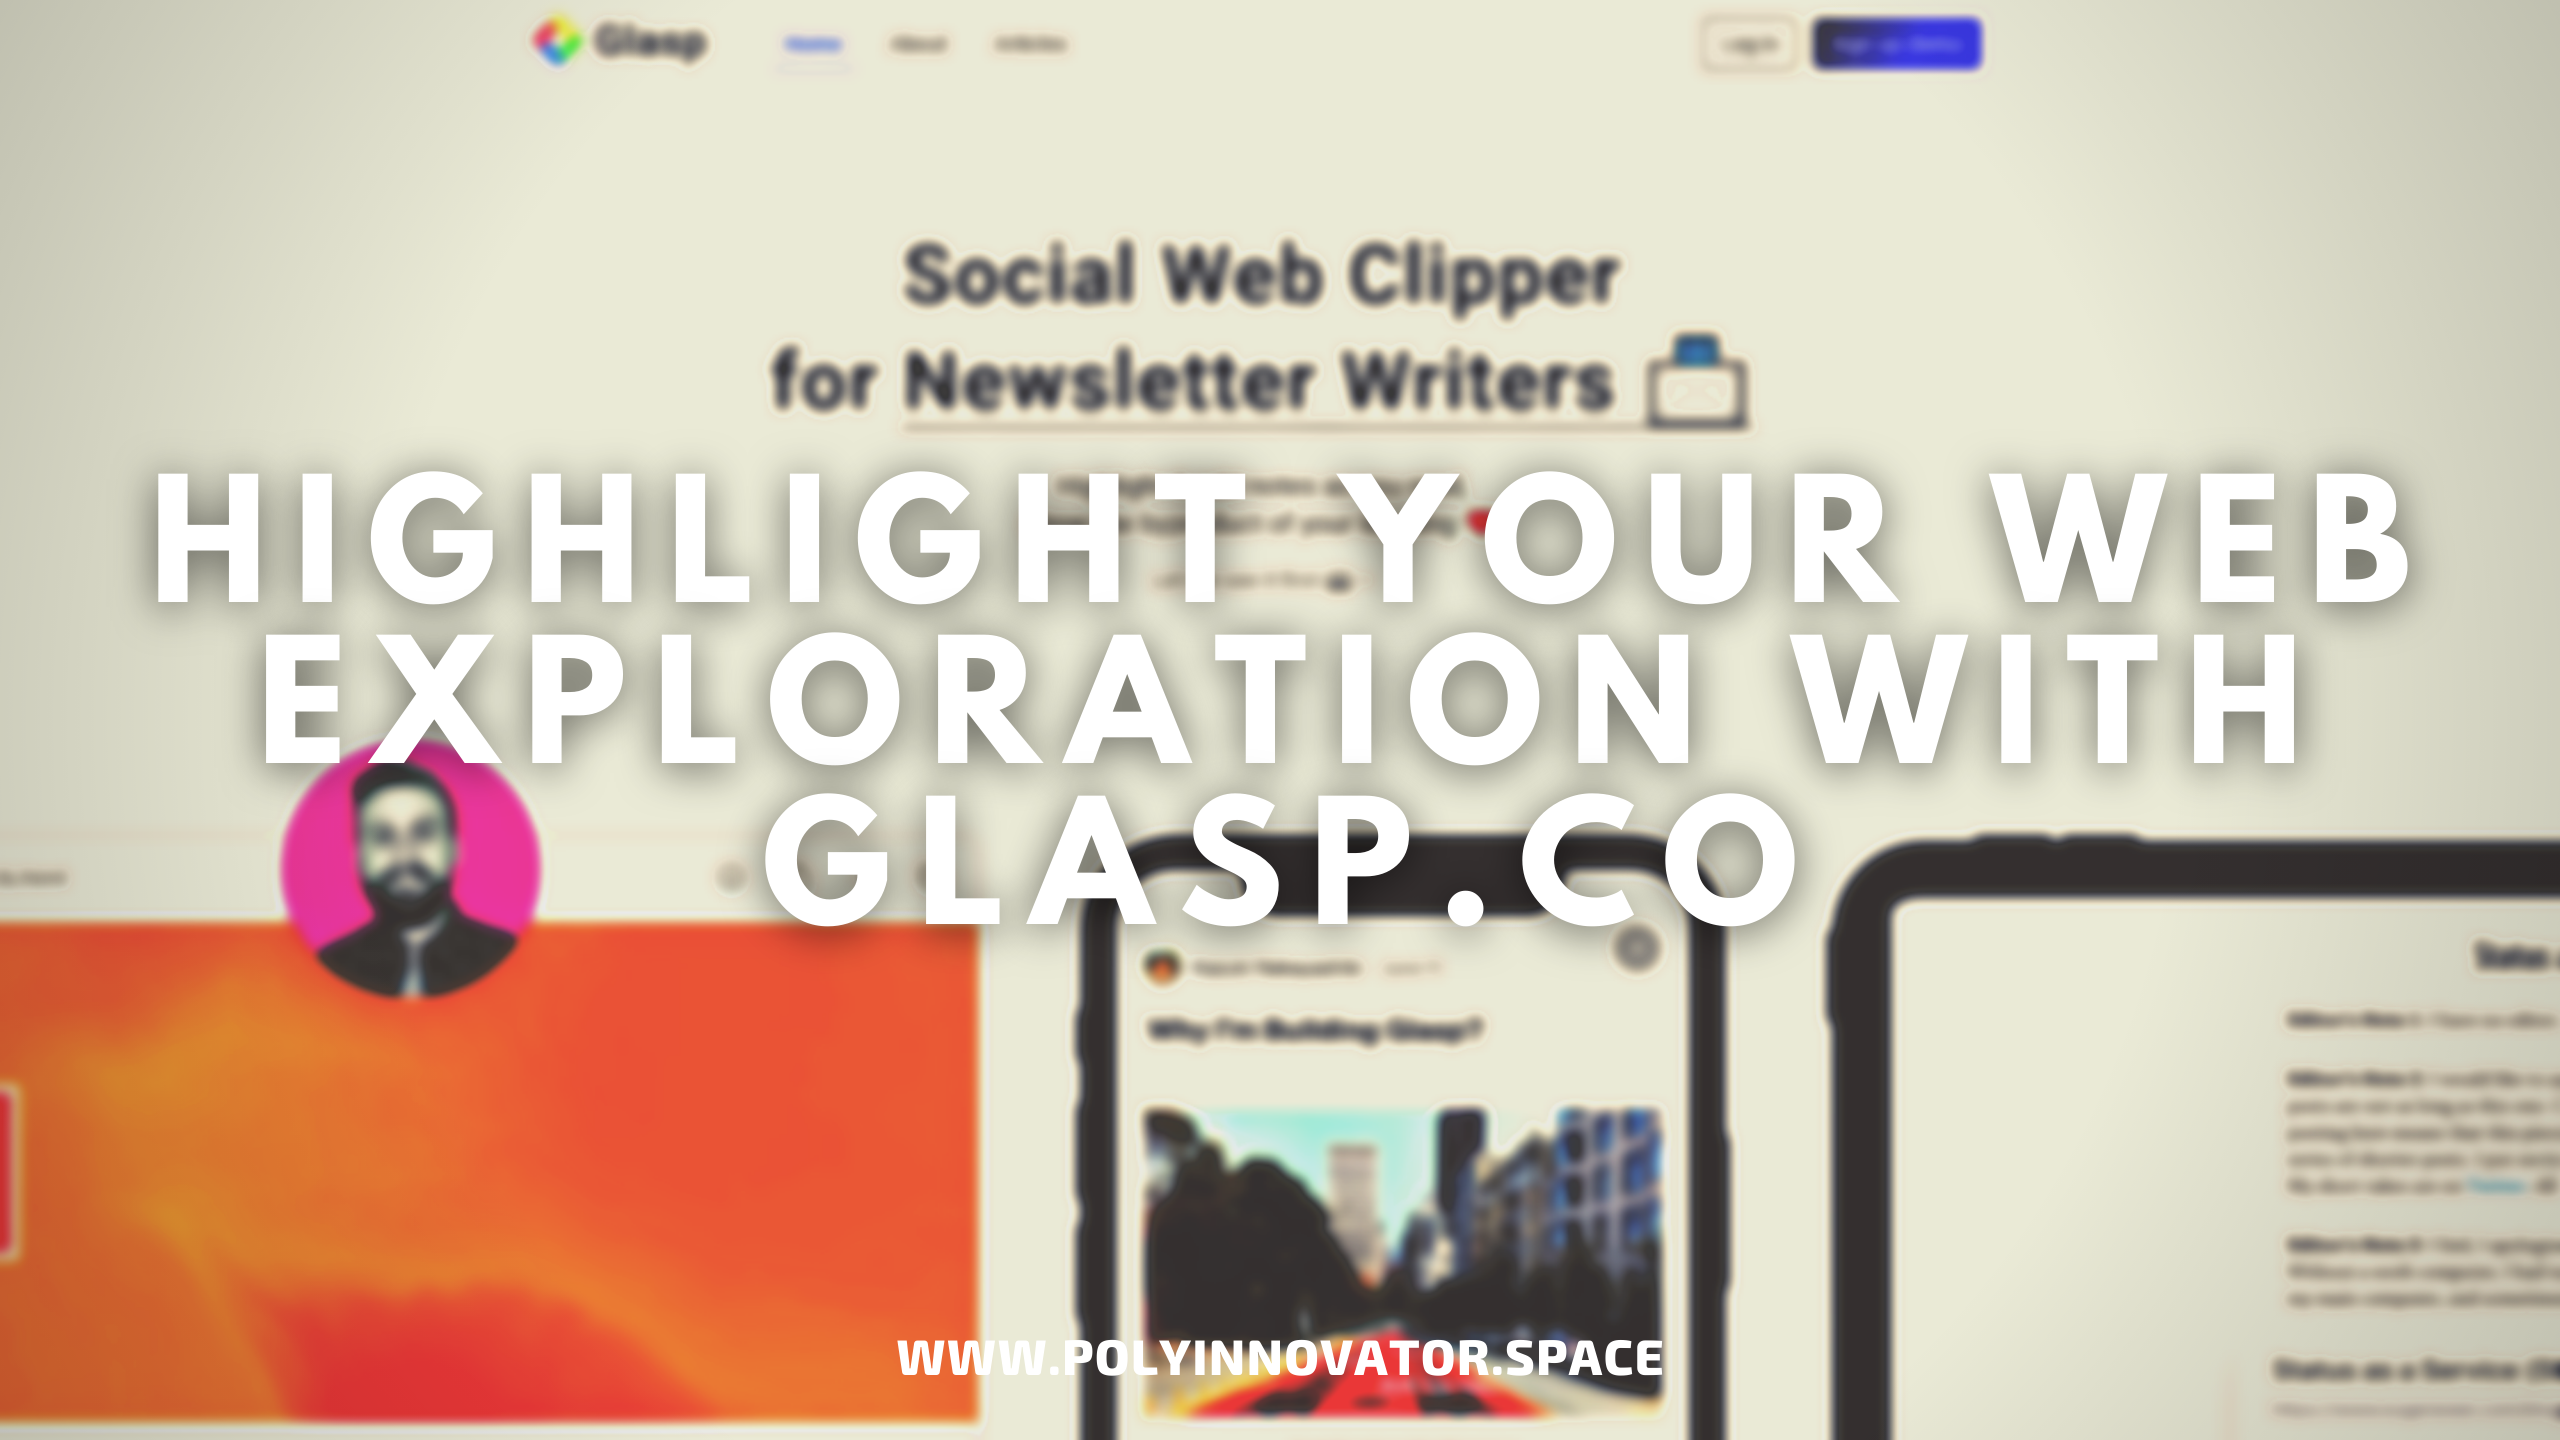 Highlight Your Web Exploration with Glasp.co